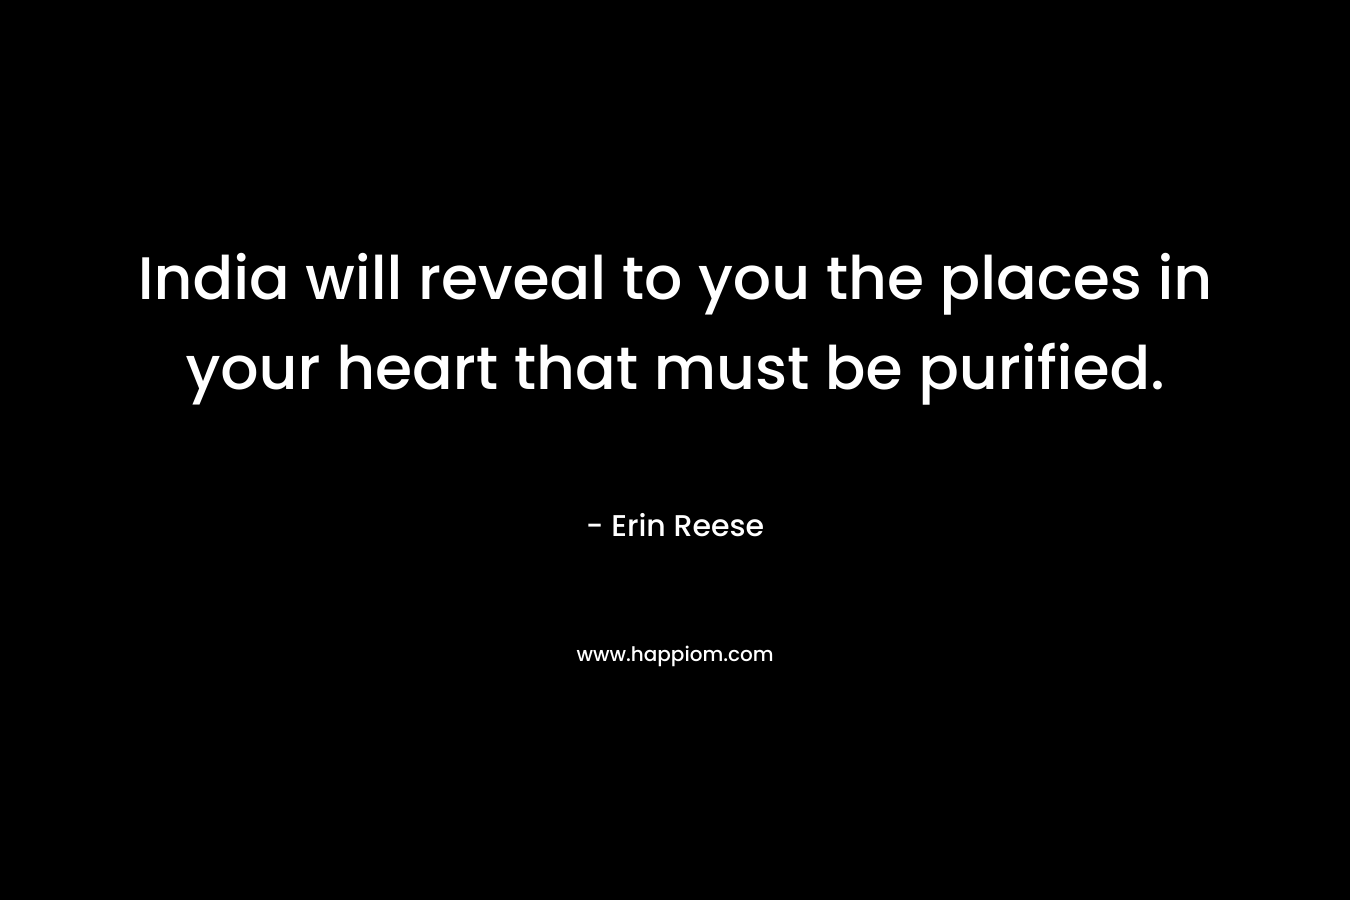 India will reveal to you the places in your heart that must be purified.